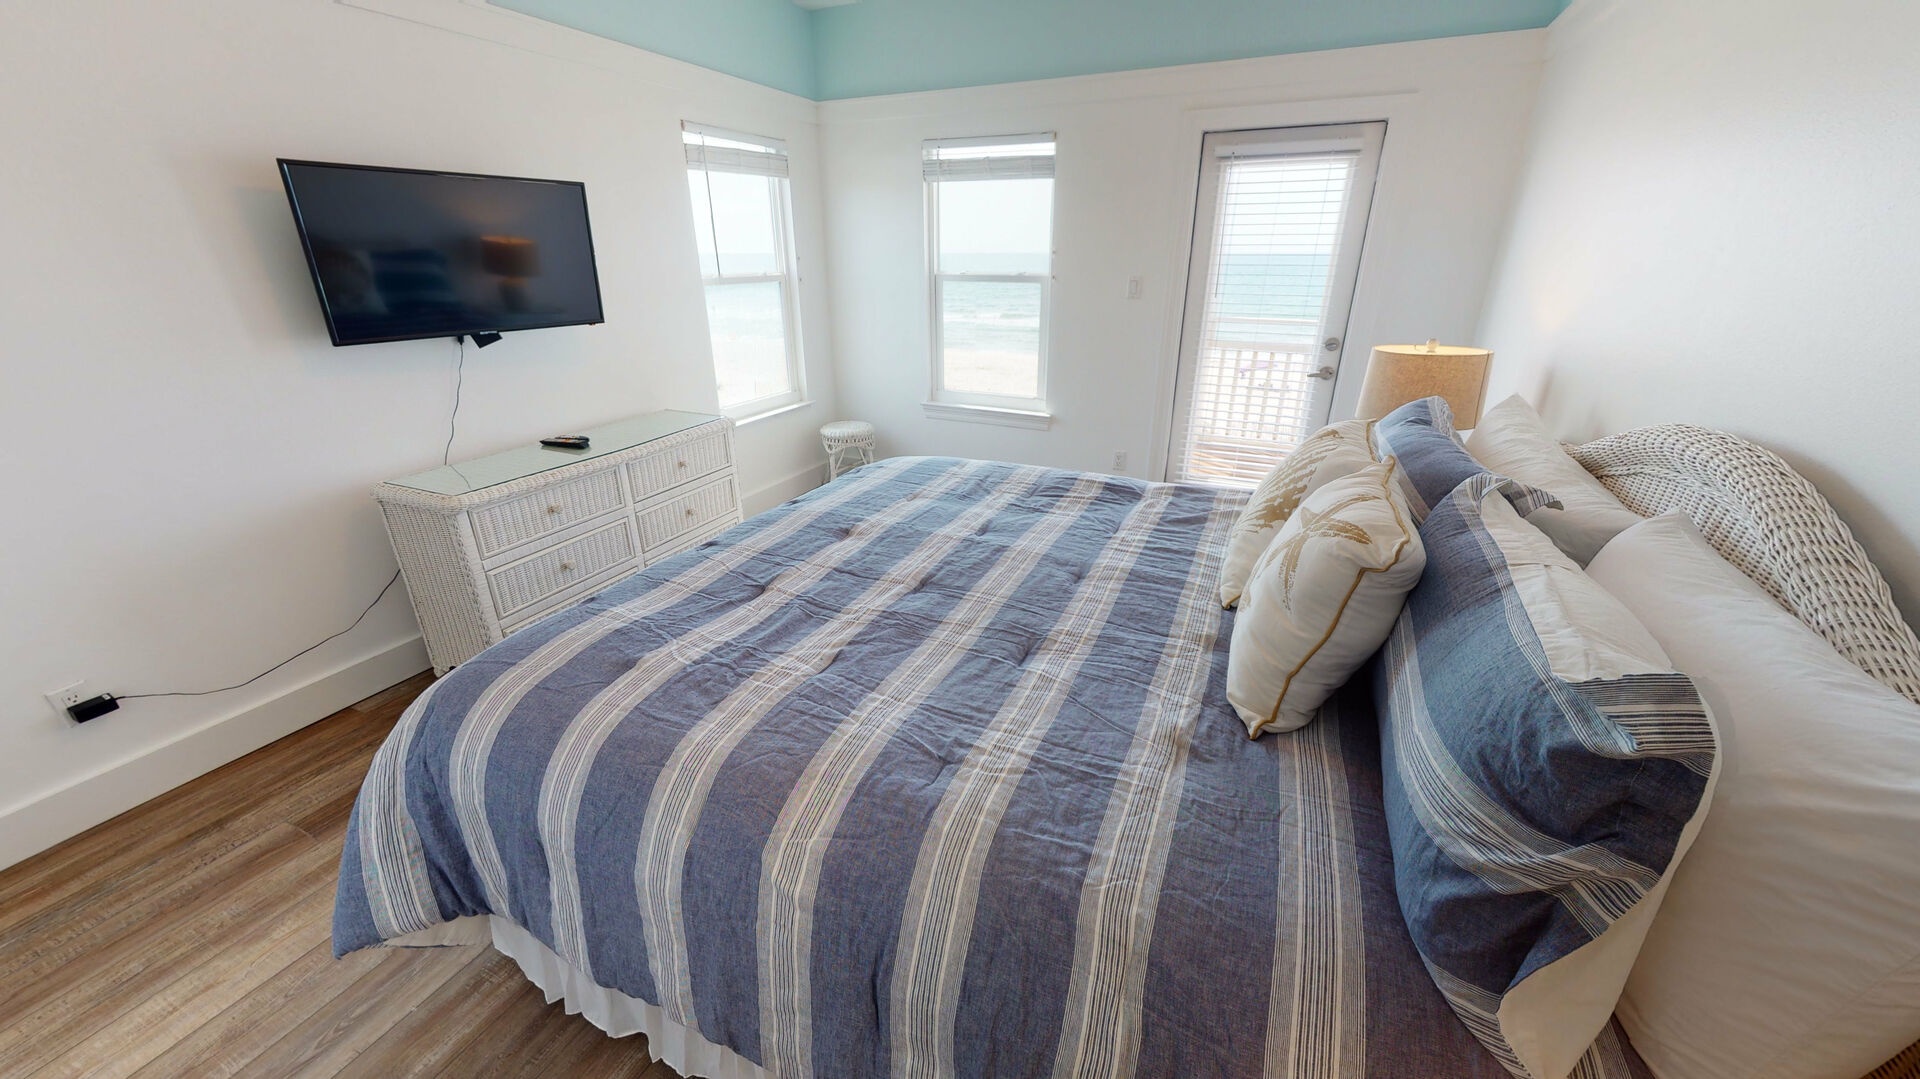 Bedroom 4 located upstairs features a king bed, TV with cable, access to the balcony with beach views and an attached, private bathroom